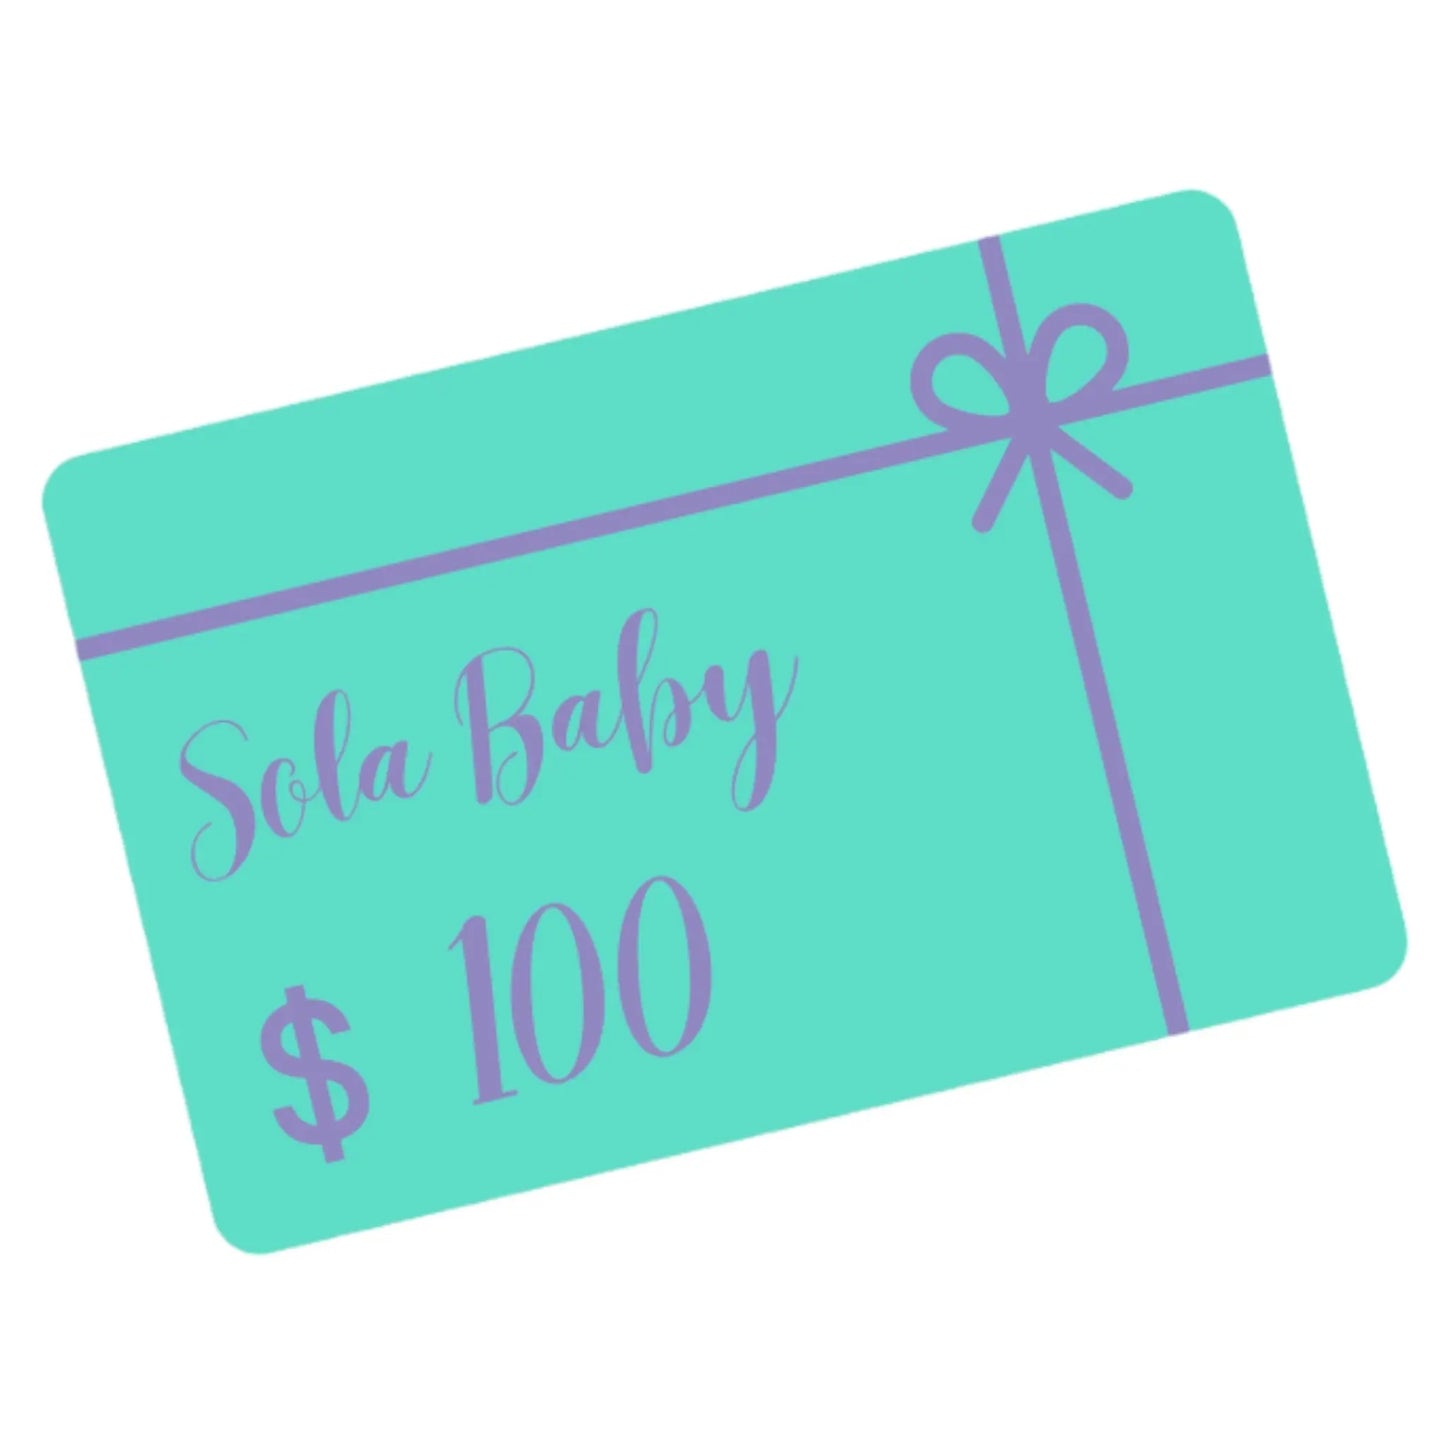 Gift card - Sola Baby Boutique